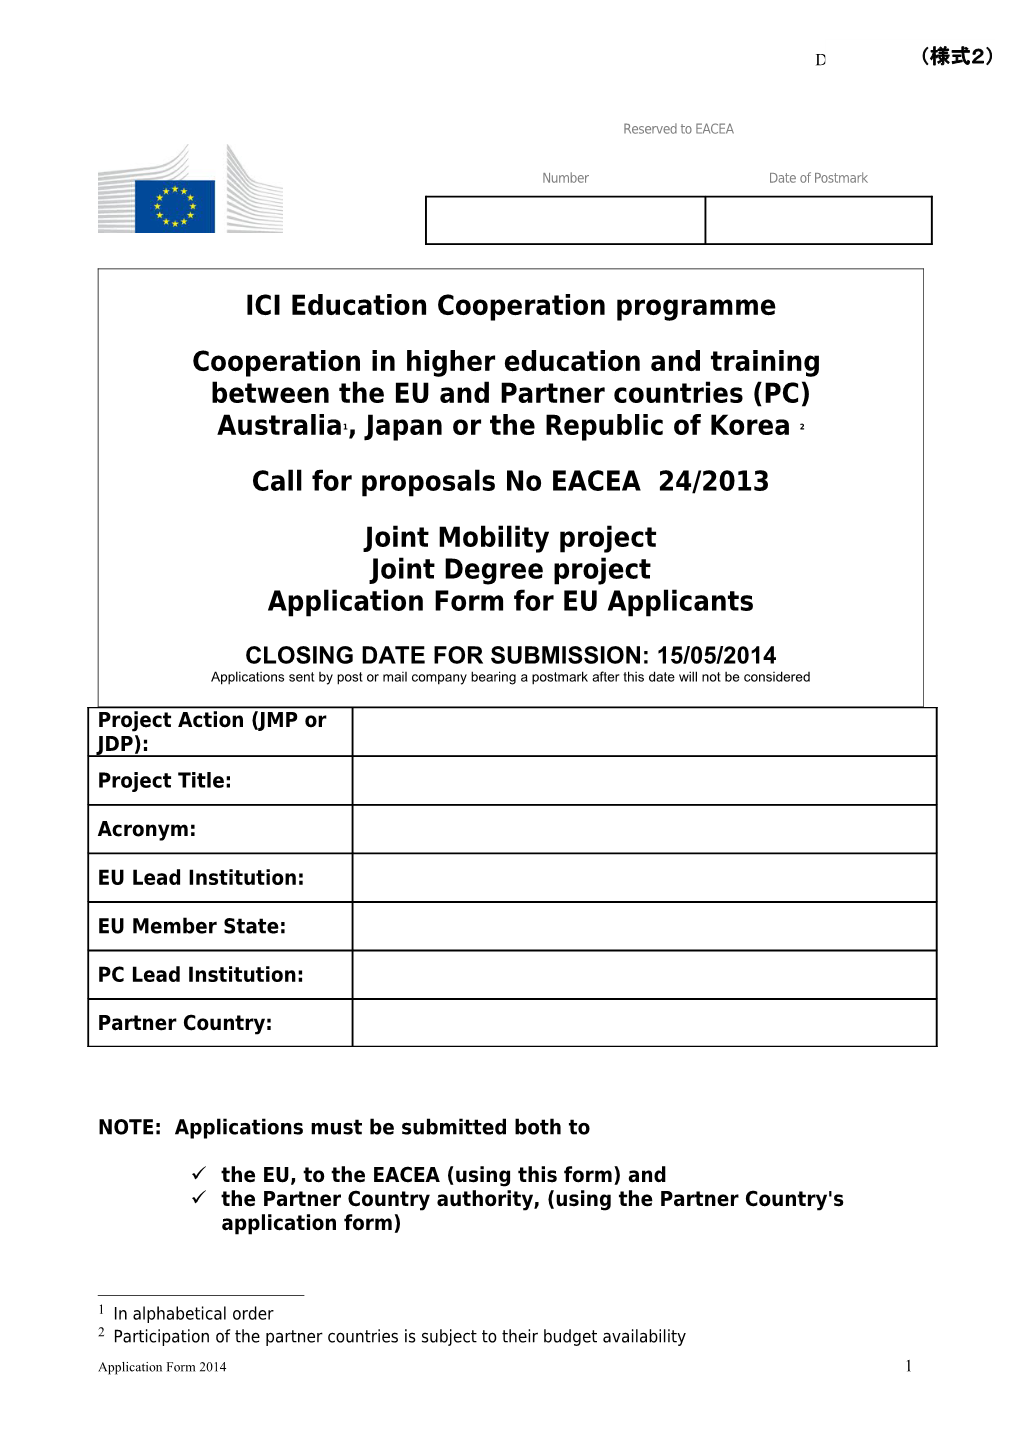 ICI Education Cooperation Programme